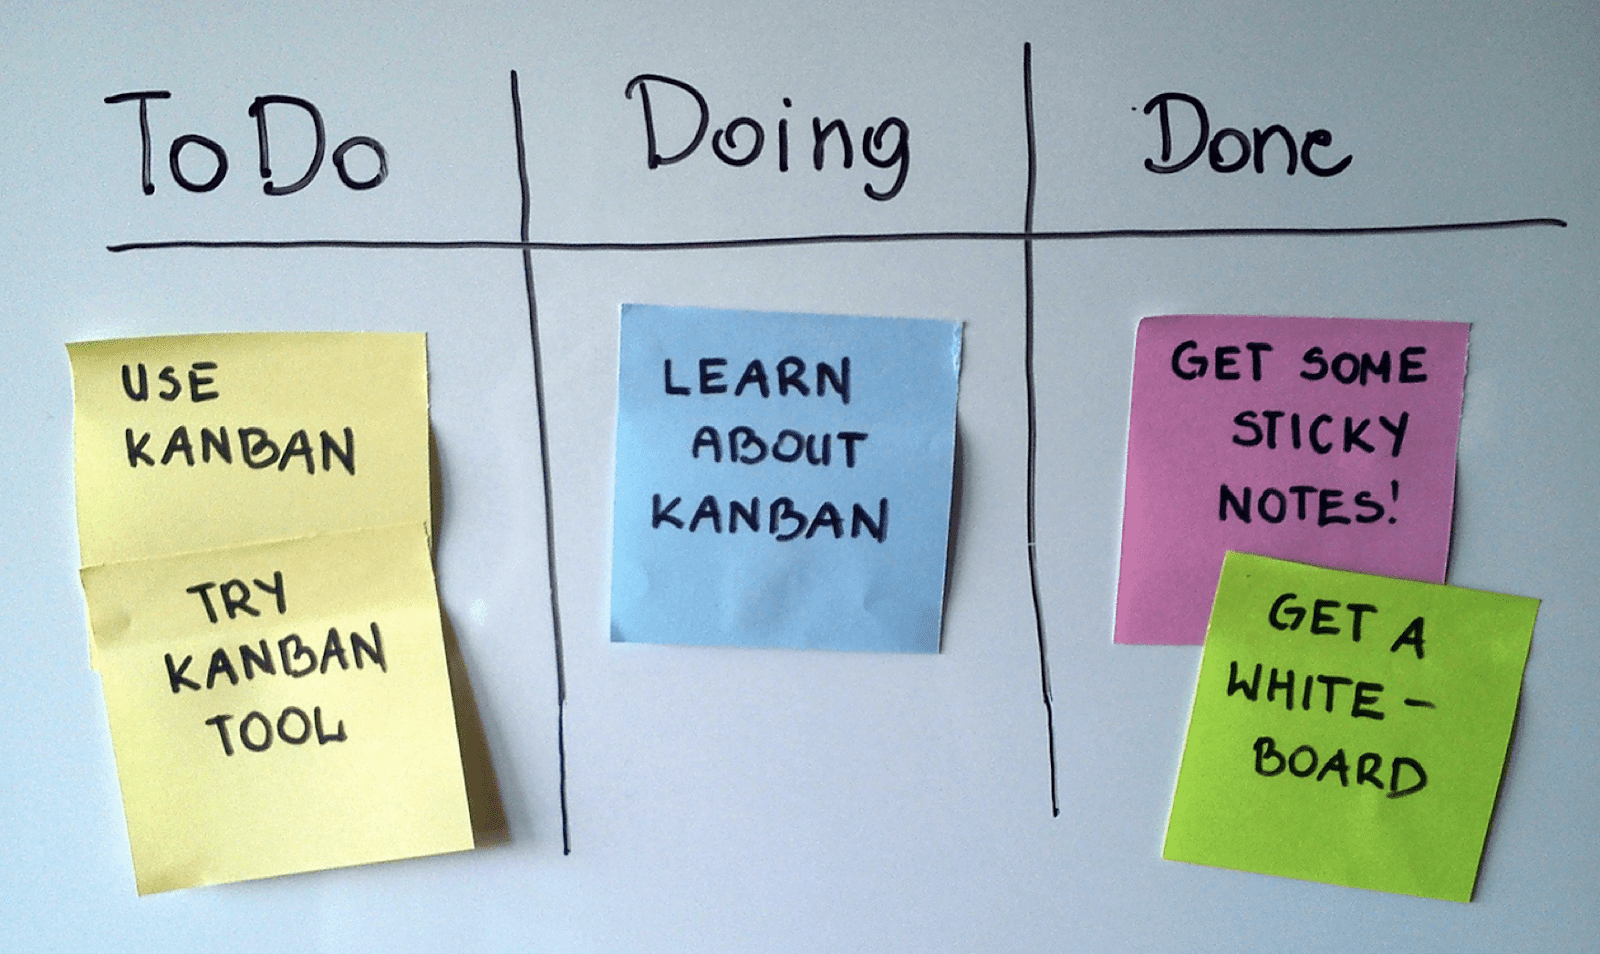 To do doing done Kanban Board